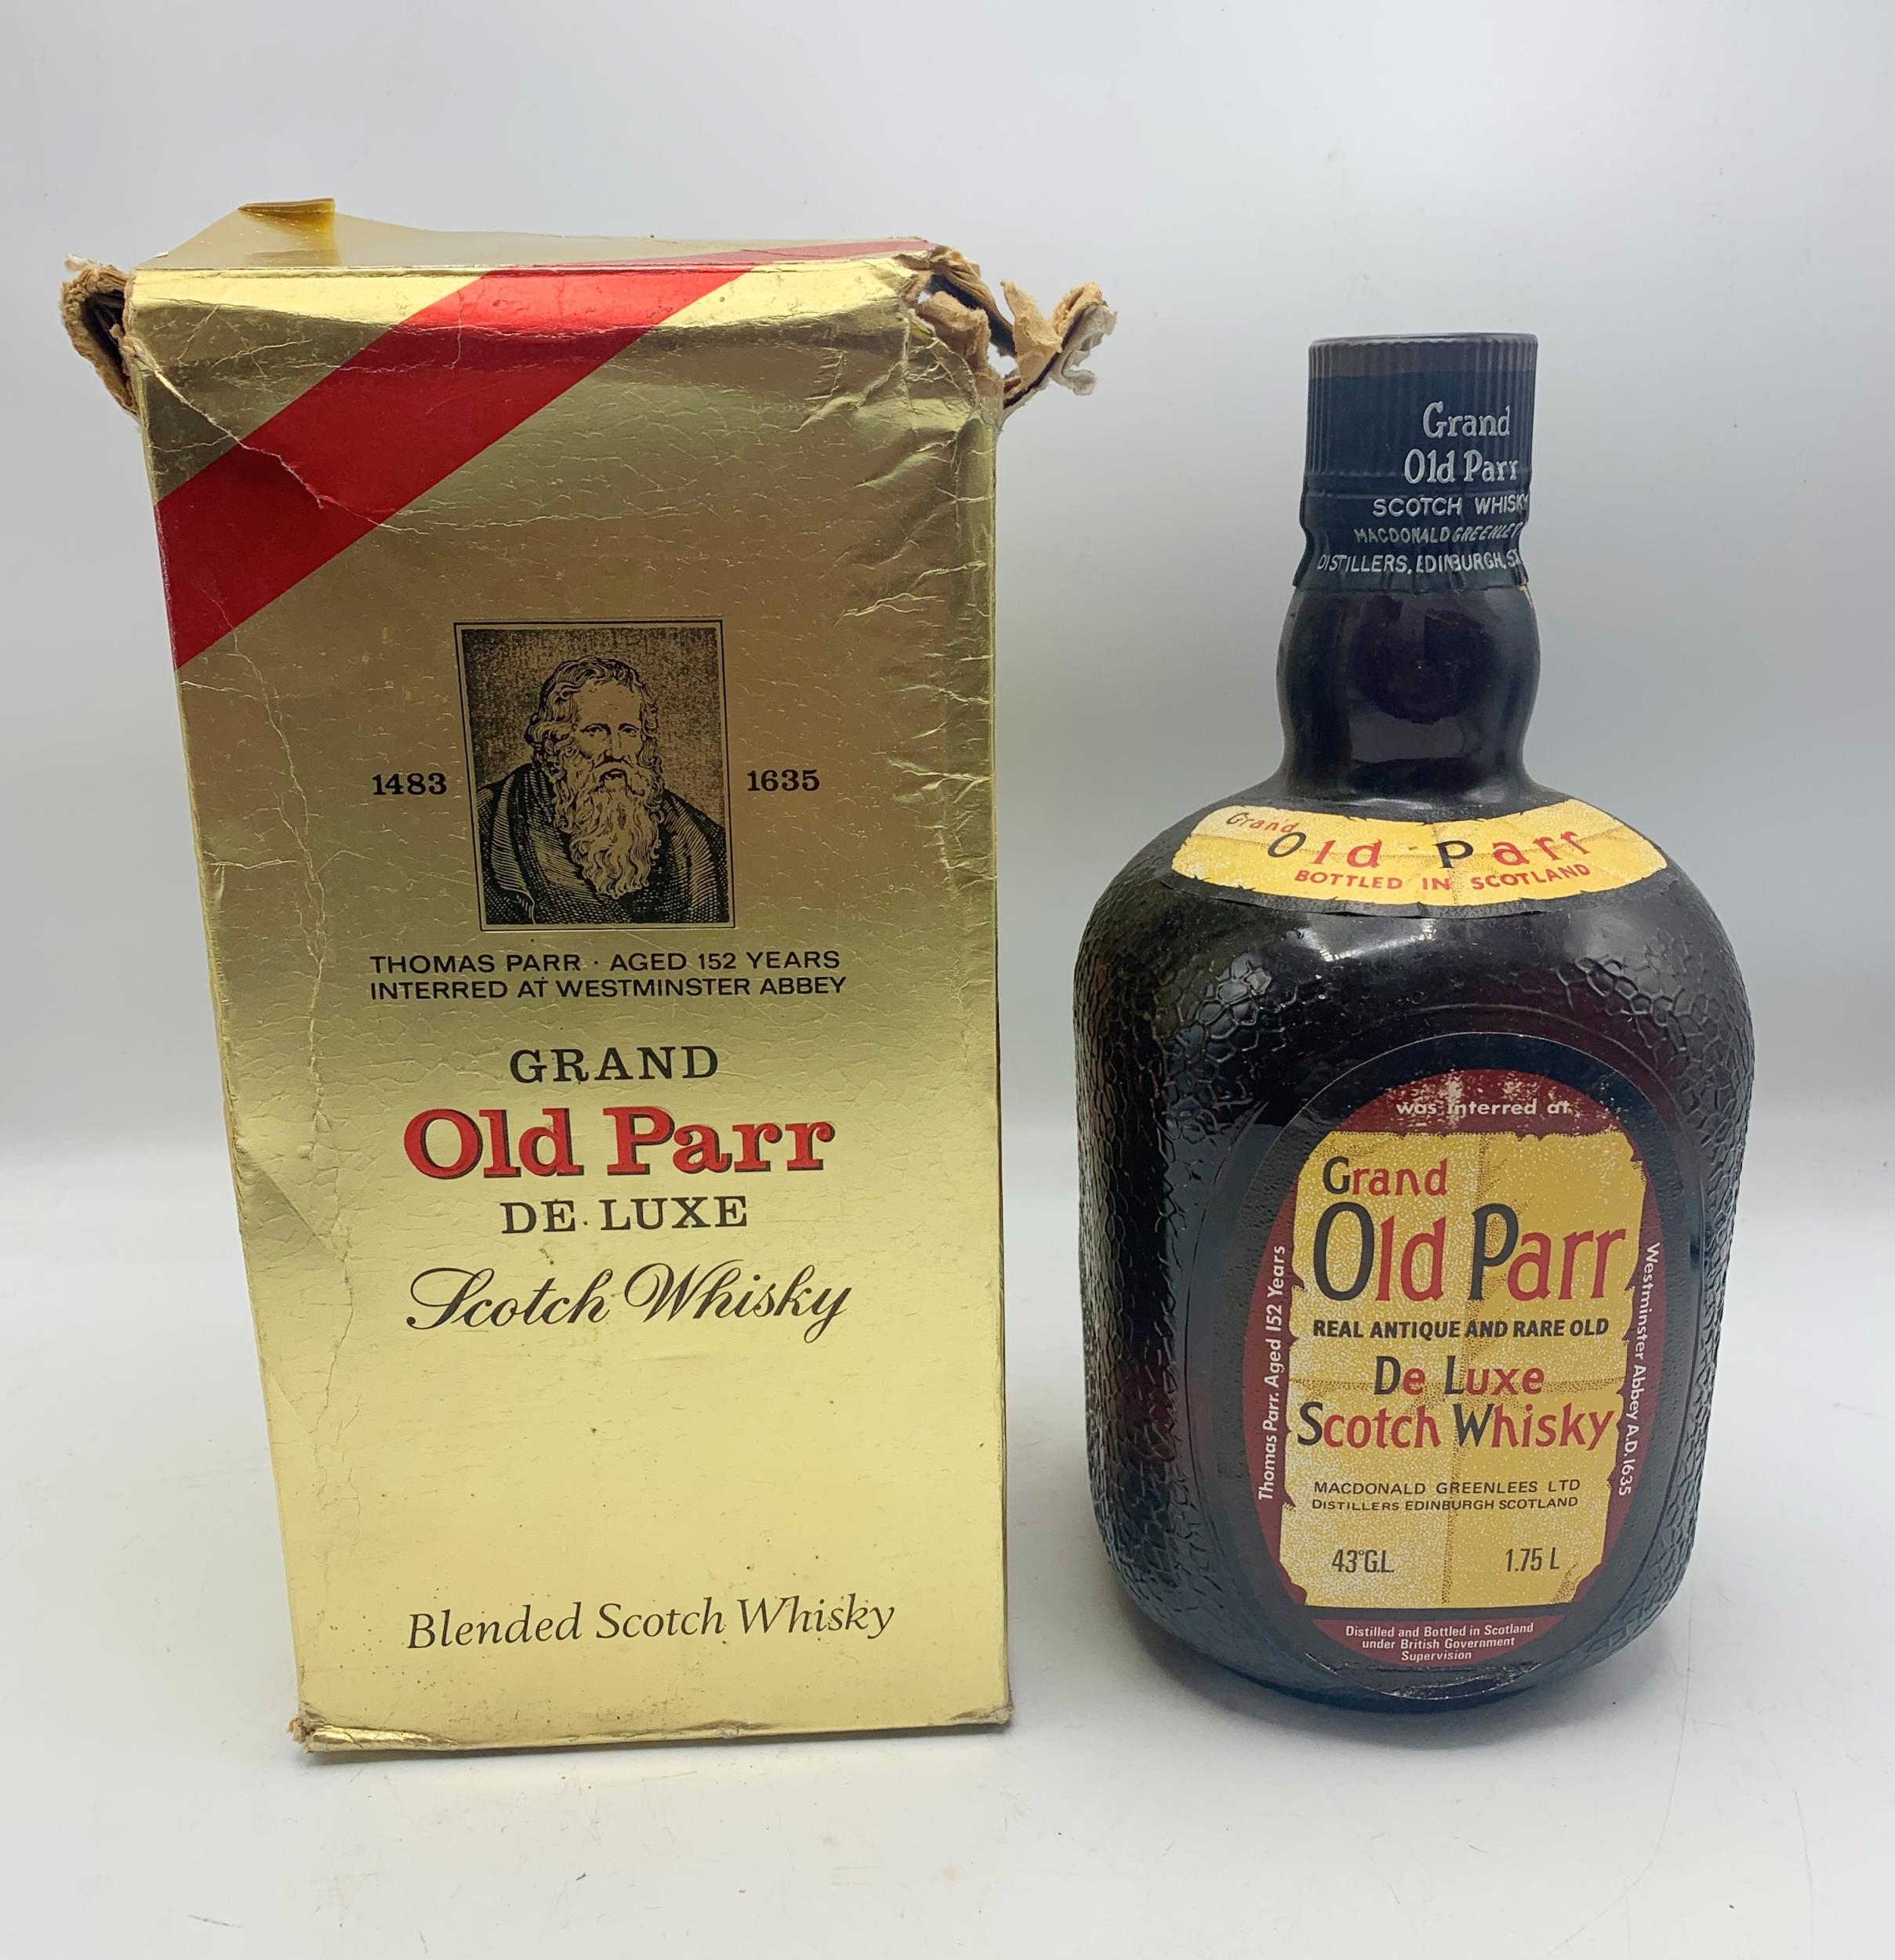 Boxed Grand Old Parr De Luxe Scotch Whisky. Unopened.